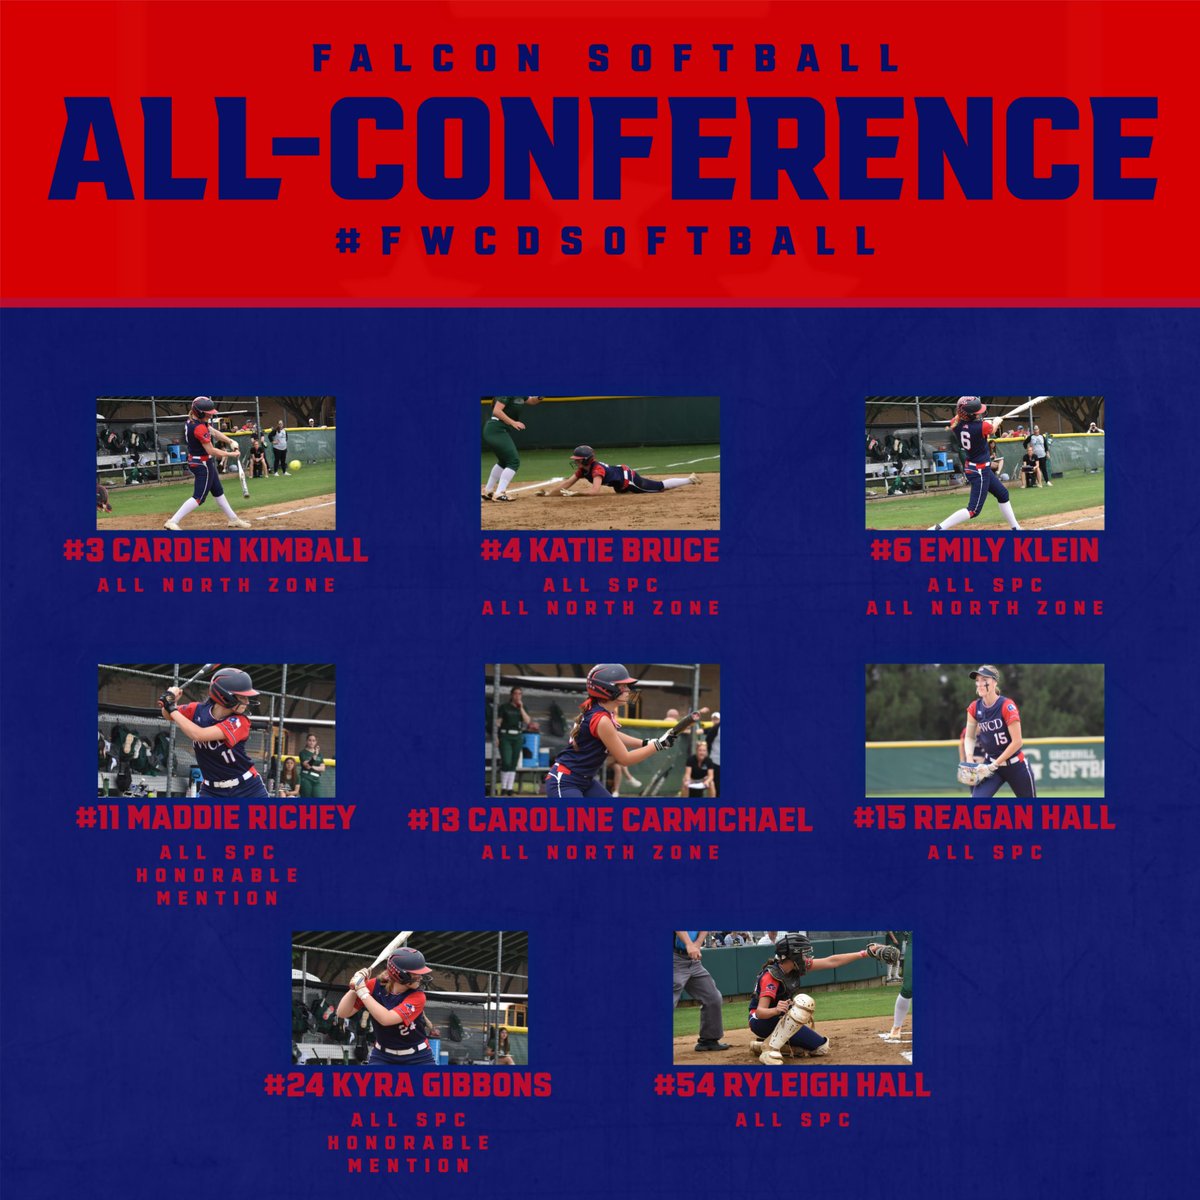 Congratulations to our All-Conference selections this season. We are so proud of you all! Go Falcons! #LEAD #FWCD #FlyHigher